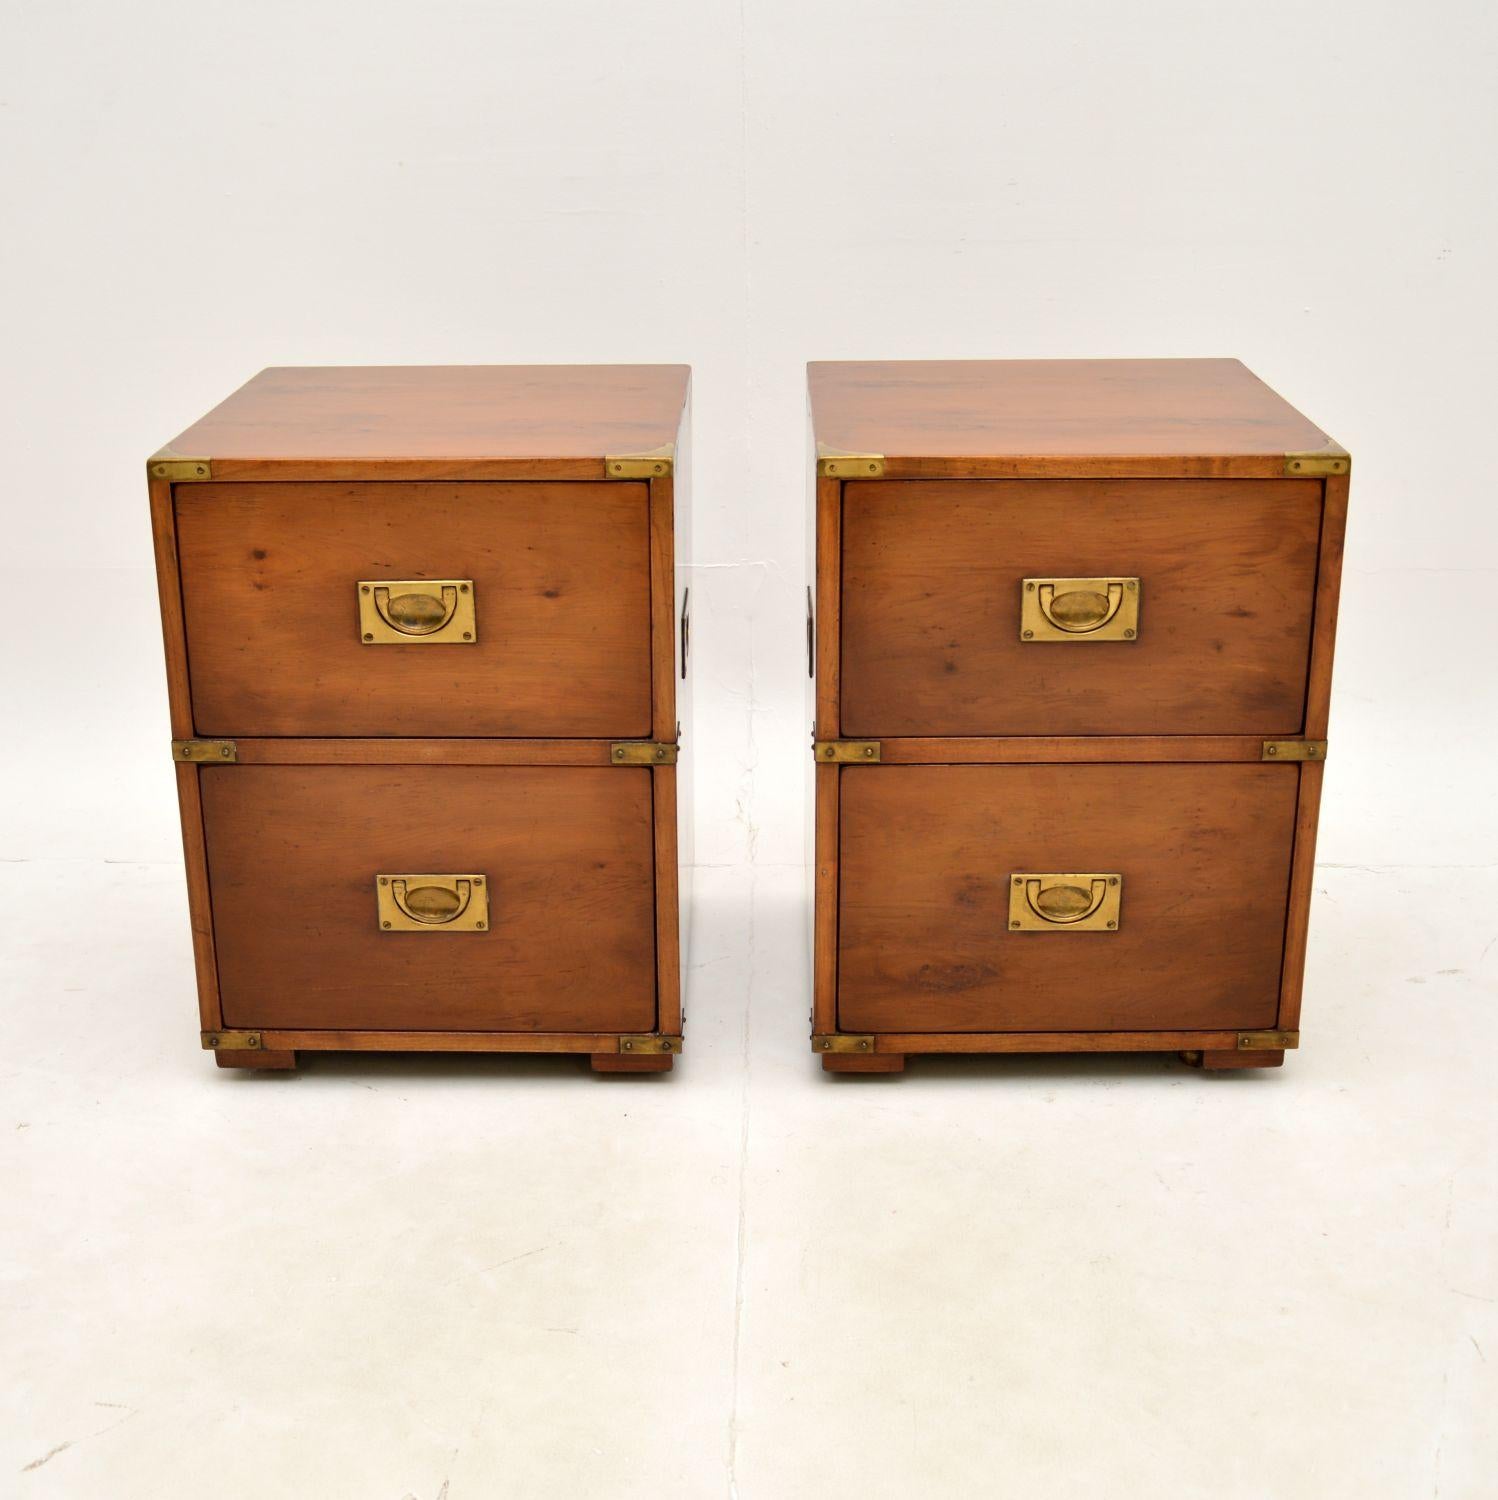 A superb pair of antique yew wood military campaign bedside chests of drawers. They were made by Kennedy furniture and were retailed in Harrods, they date from around the 1960-70’s.

They are of exceptional quality, very heavy with solid oak